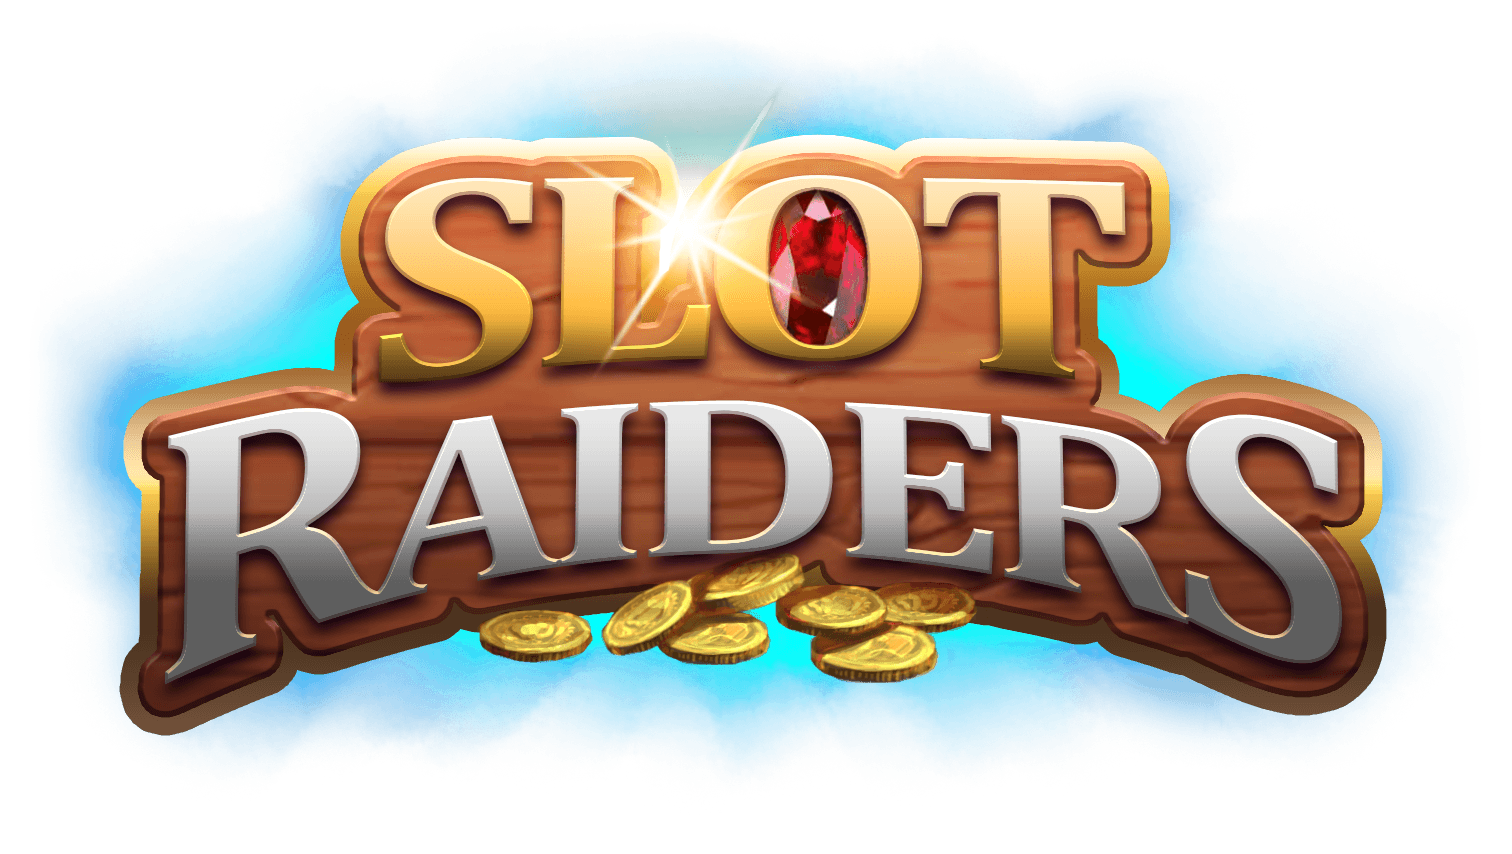 Want to Play a Slot Machine Adventure Game? Check out Slot Raiders